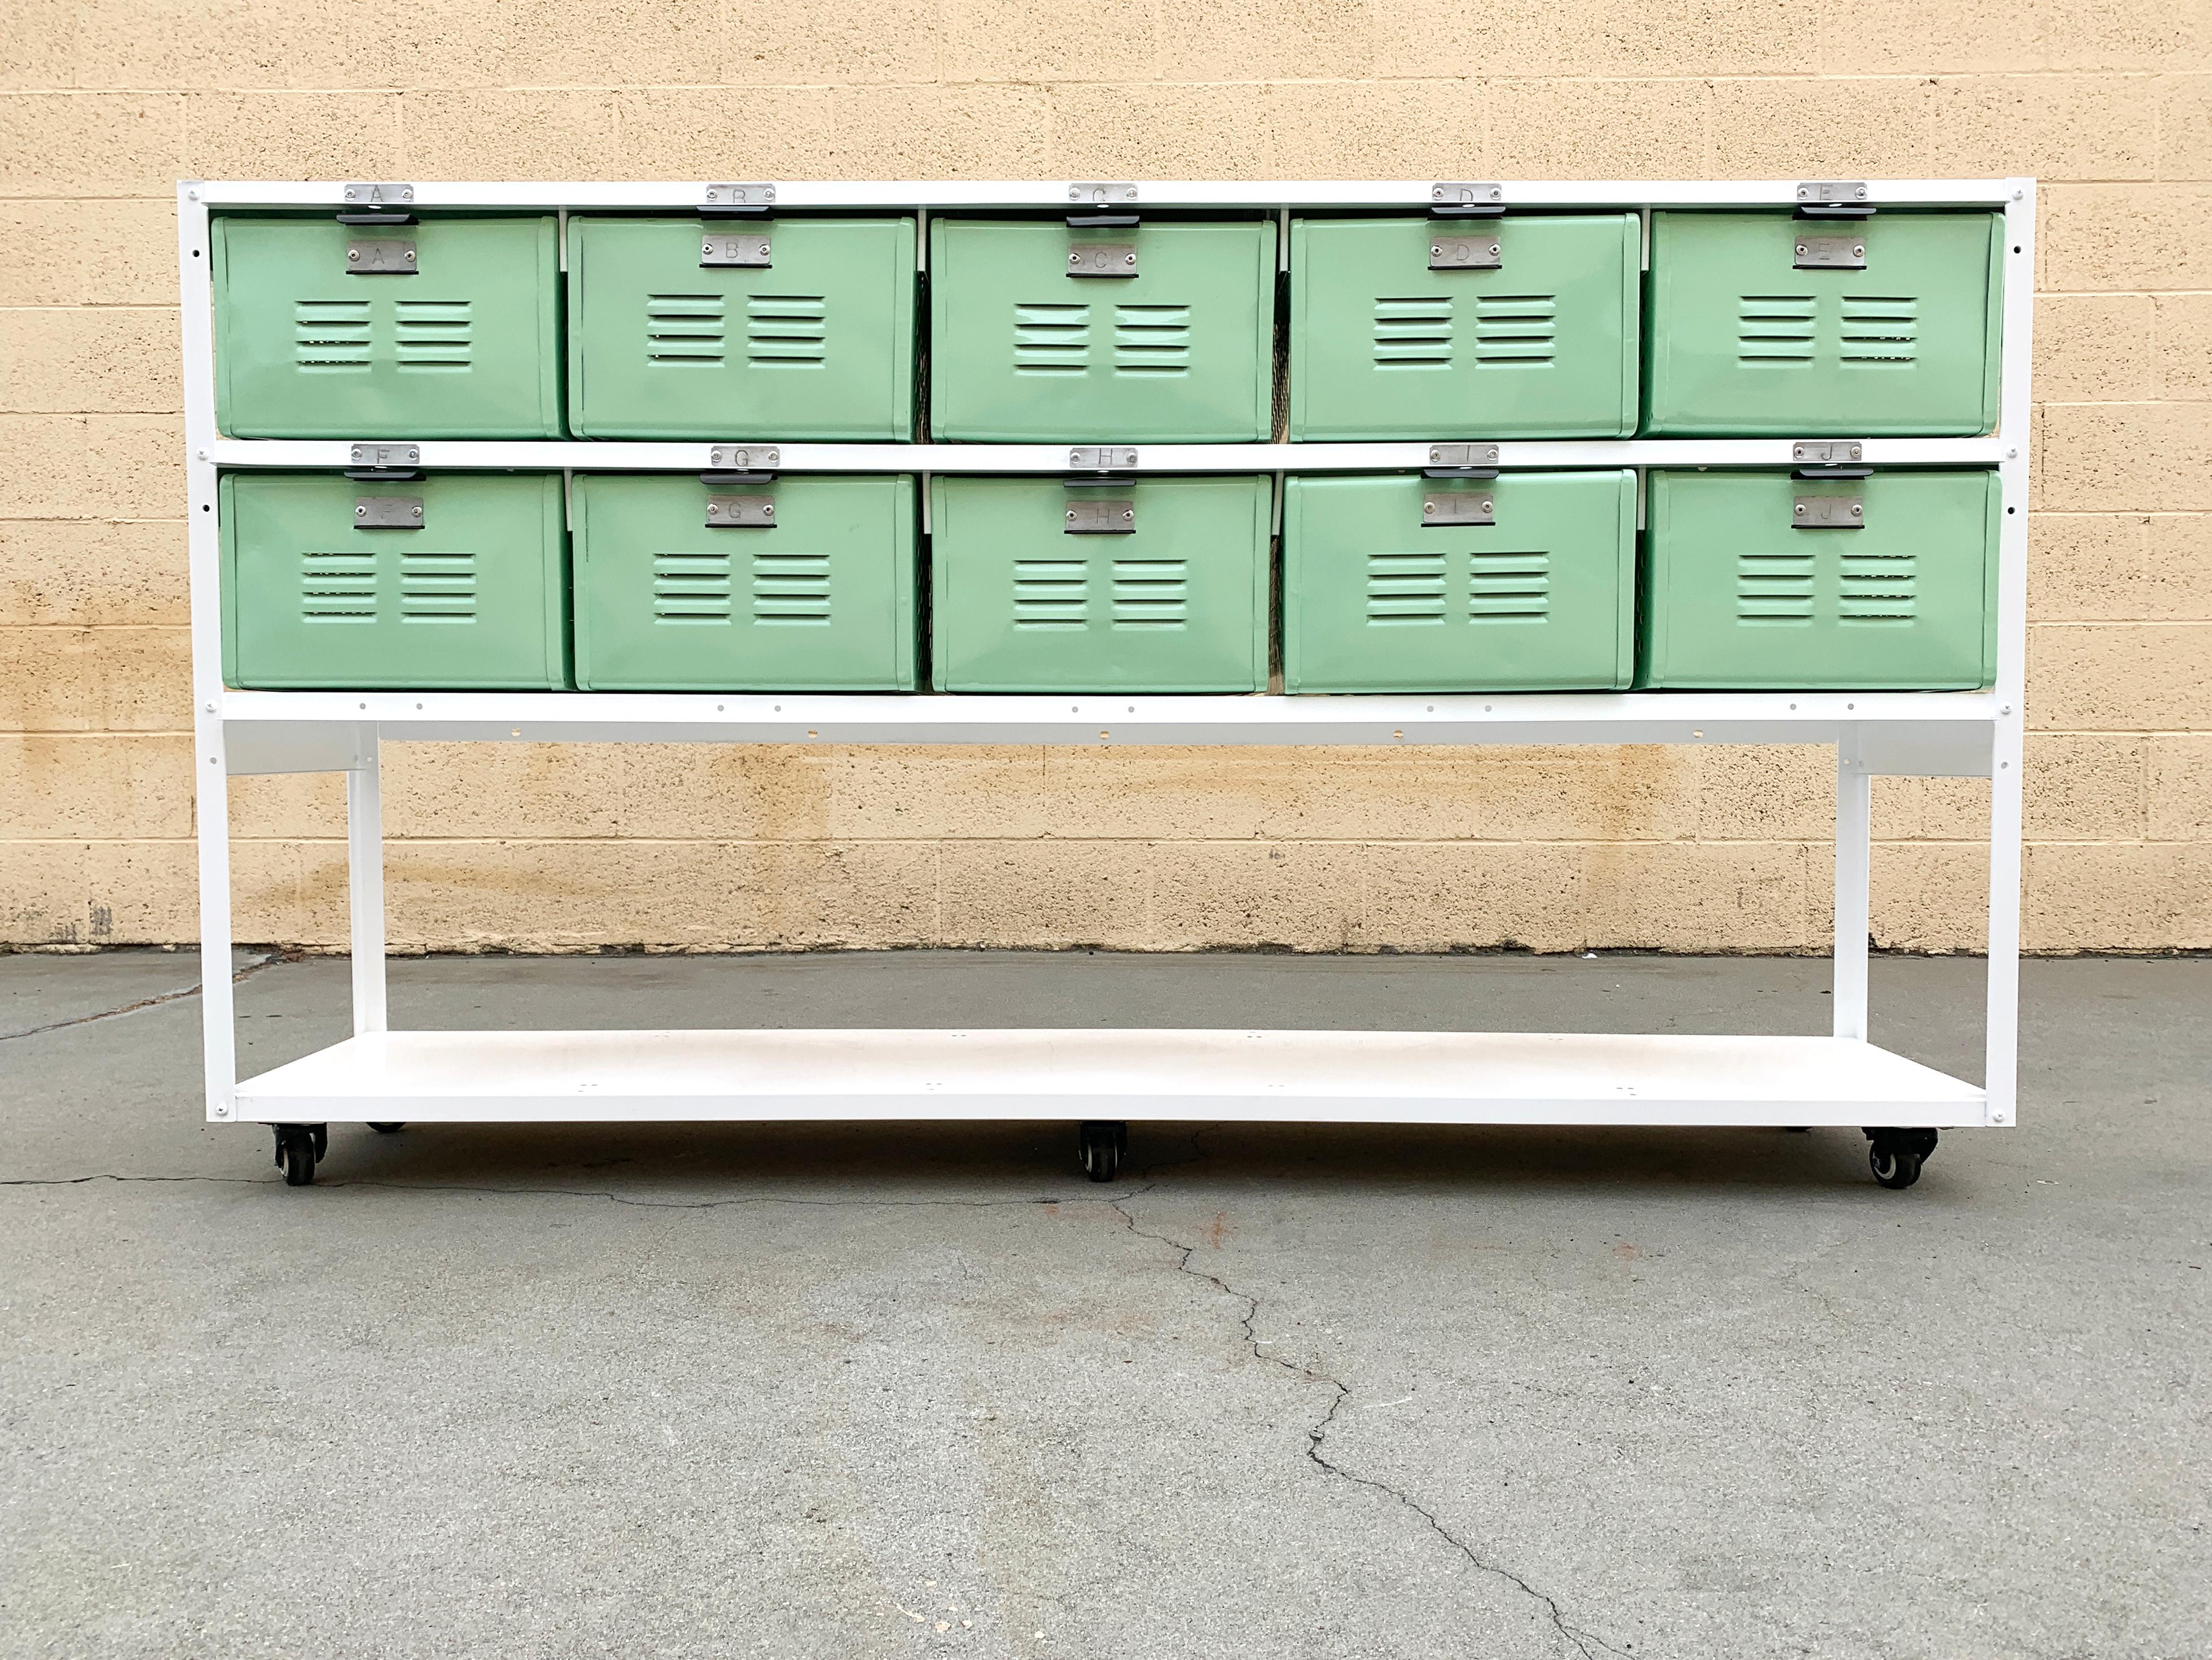 Return policy: This is a custom made piece. All sales final on custom orders and custom fabrications.

Custom made 5 x 2 locker basket unit designed with an open shelf and locking casters. Ideal for storing shoes or for open display. Our all new,